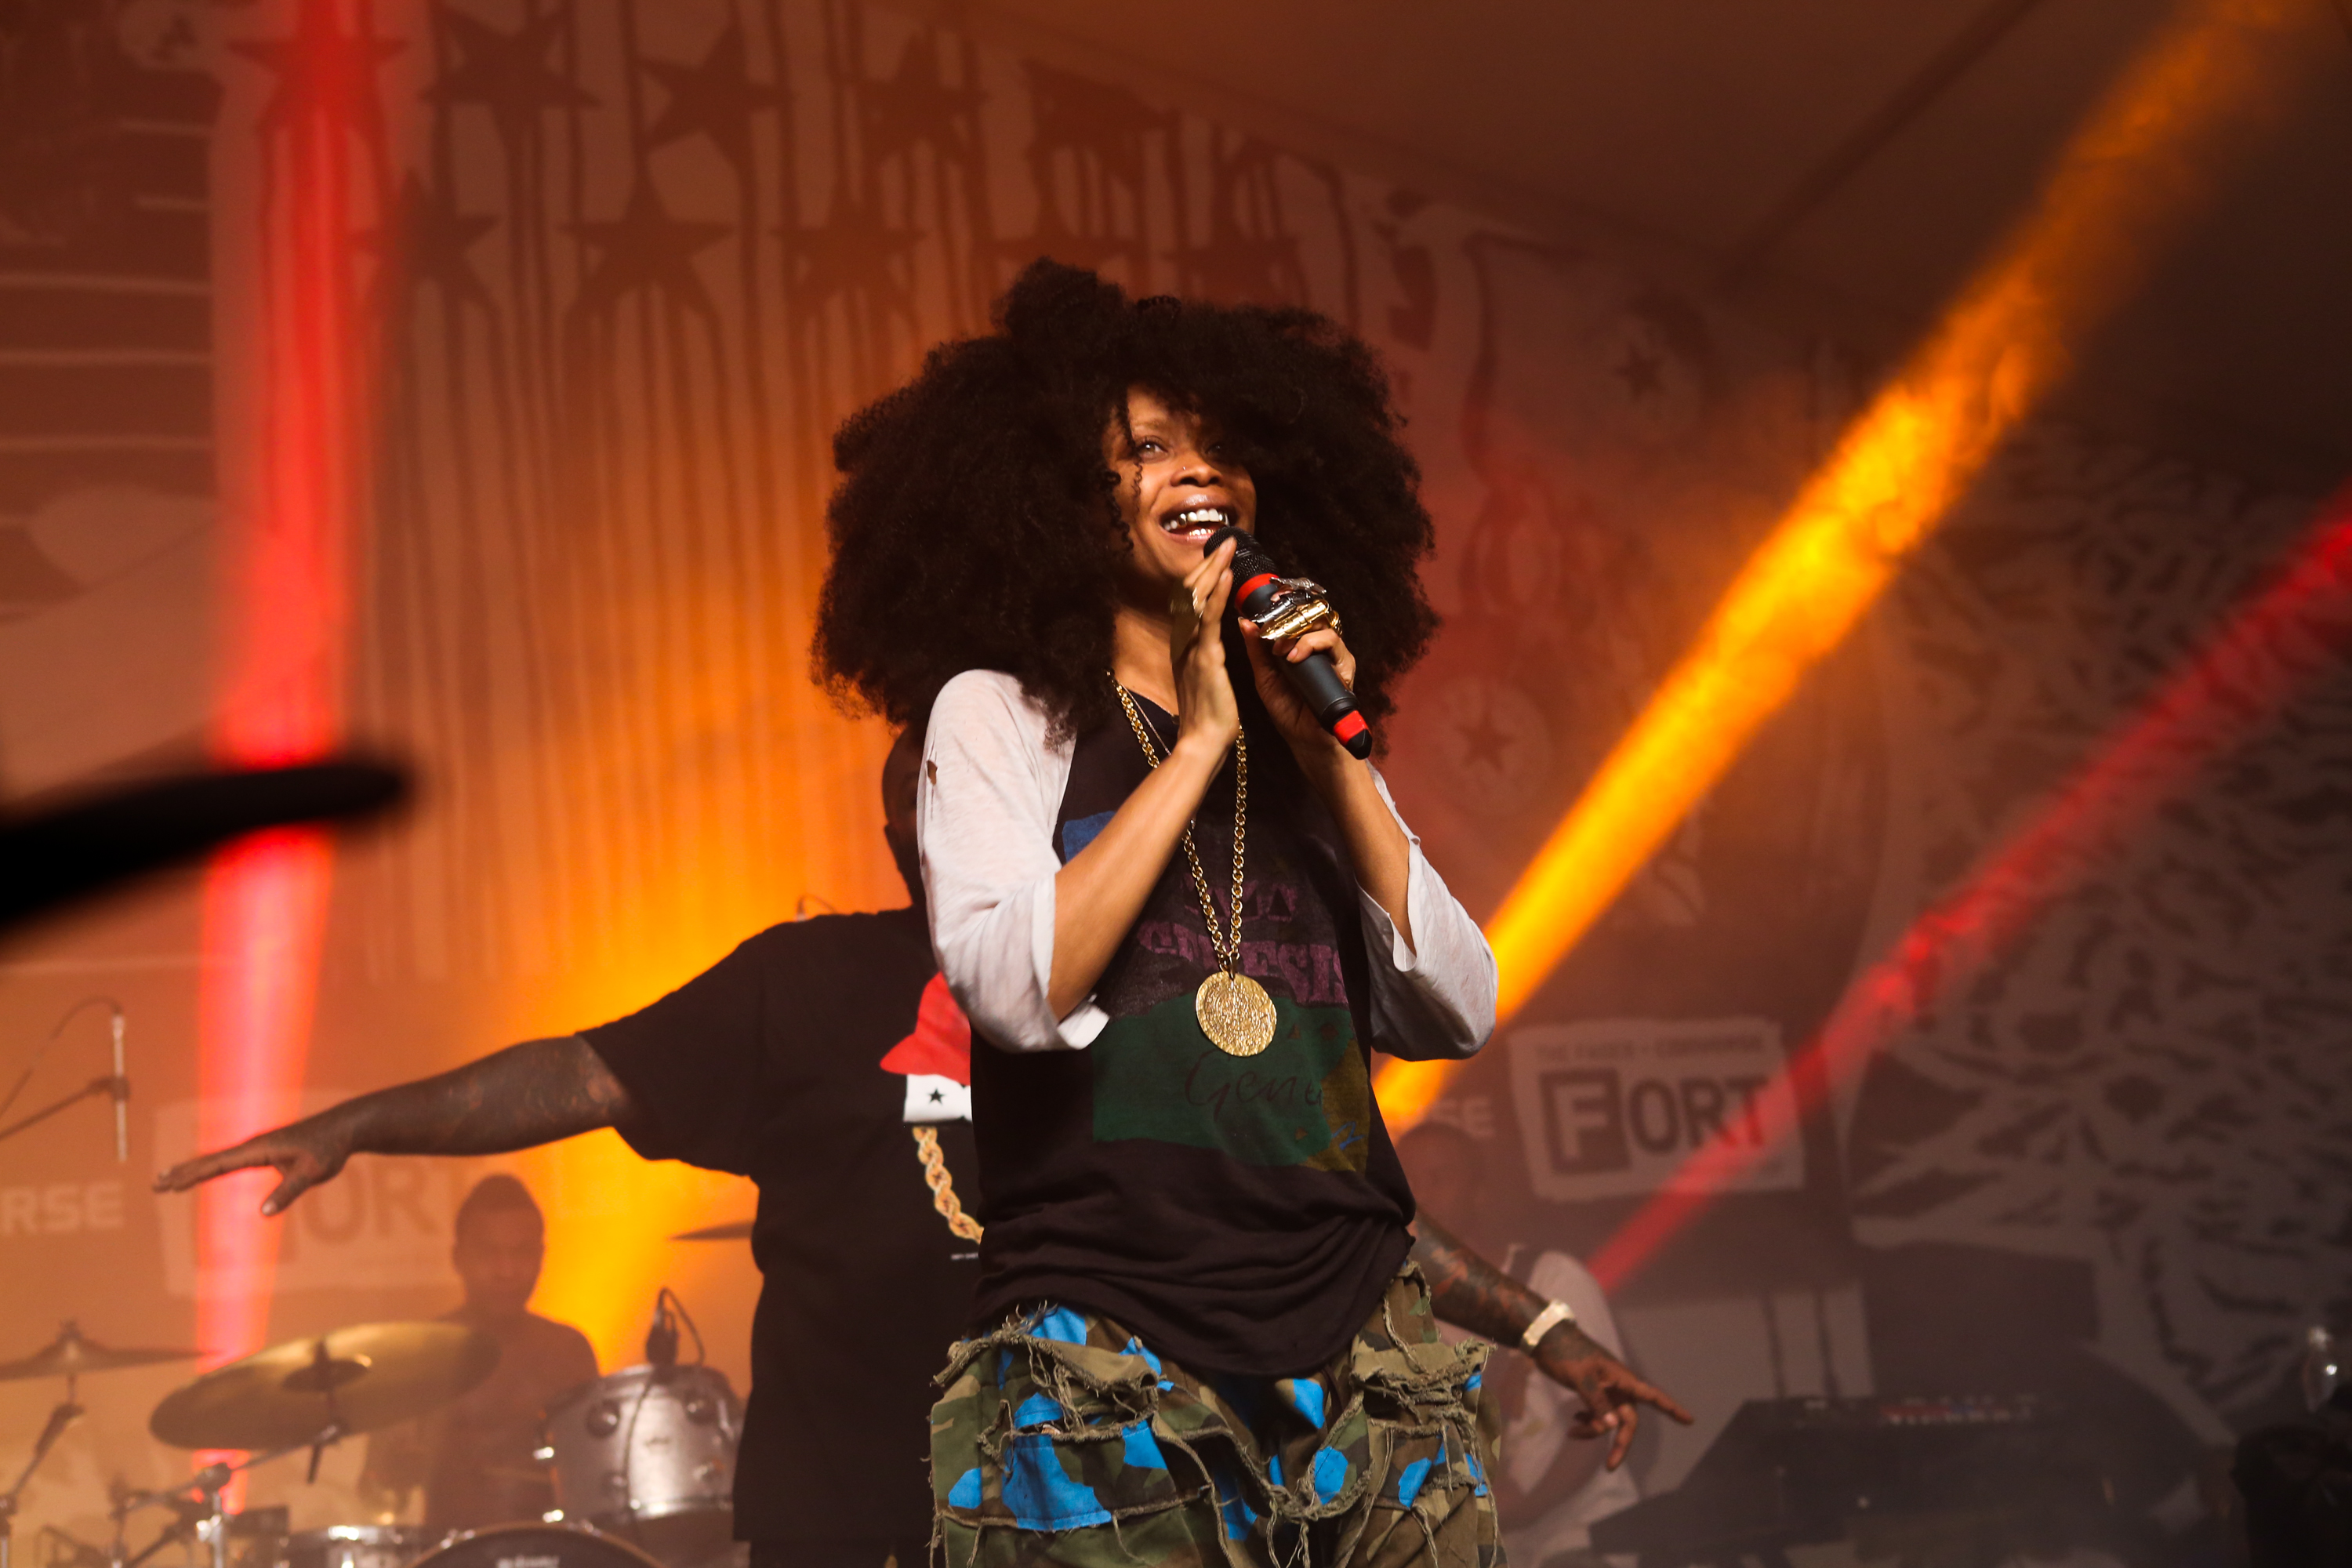 Erykah Badu performs onstage at The Fader Fort presented by Converse during SXSW on March 15, 2014 in Austin, Texas. (Roger Kisby&mdash;Getty Images)